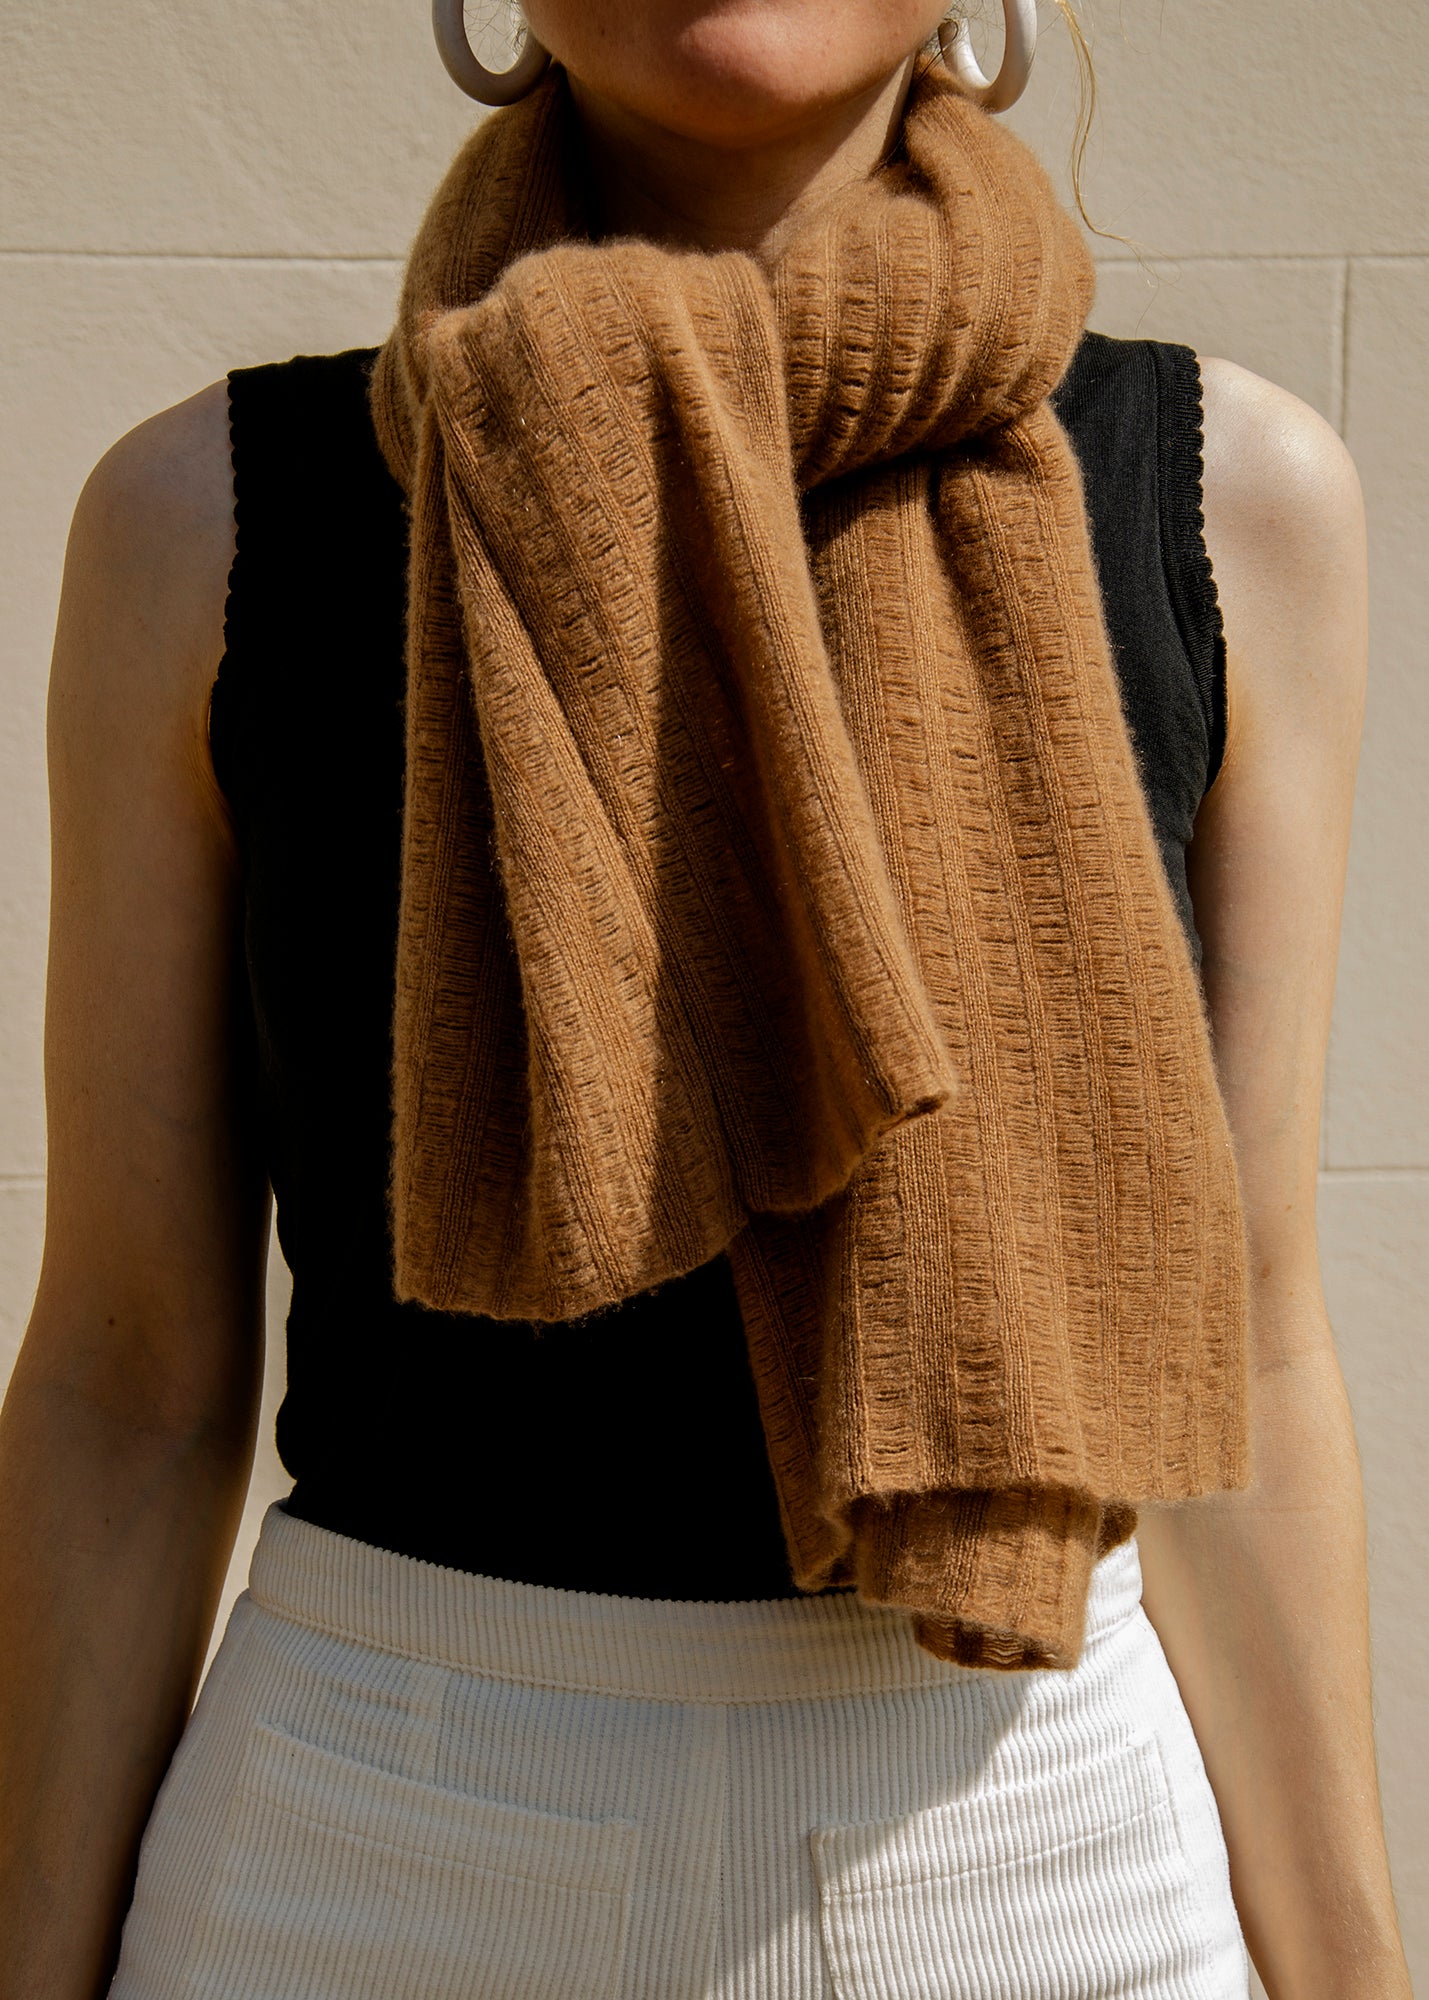 Women's cashmere scarf in caramel handcrafted in England